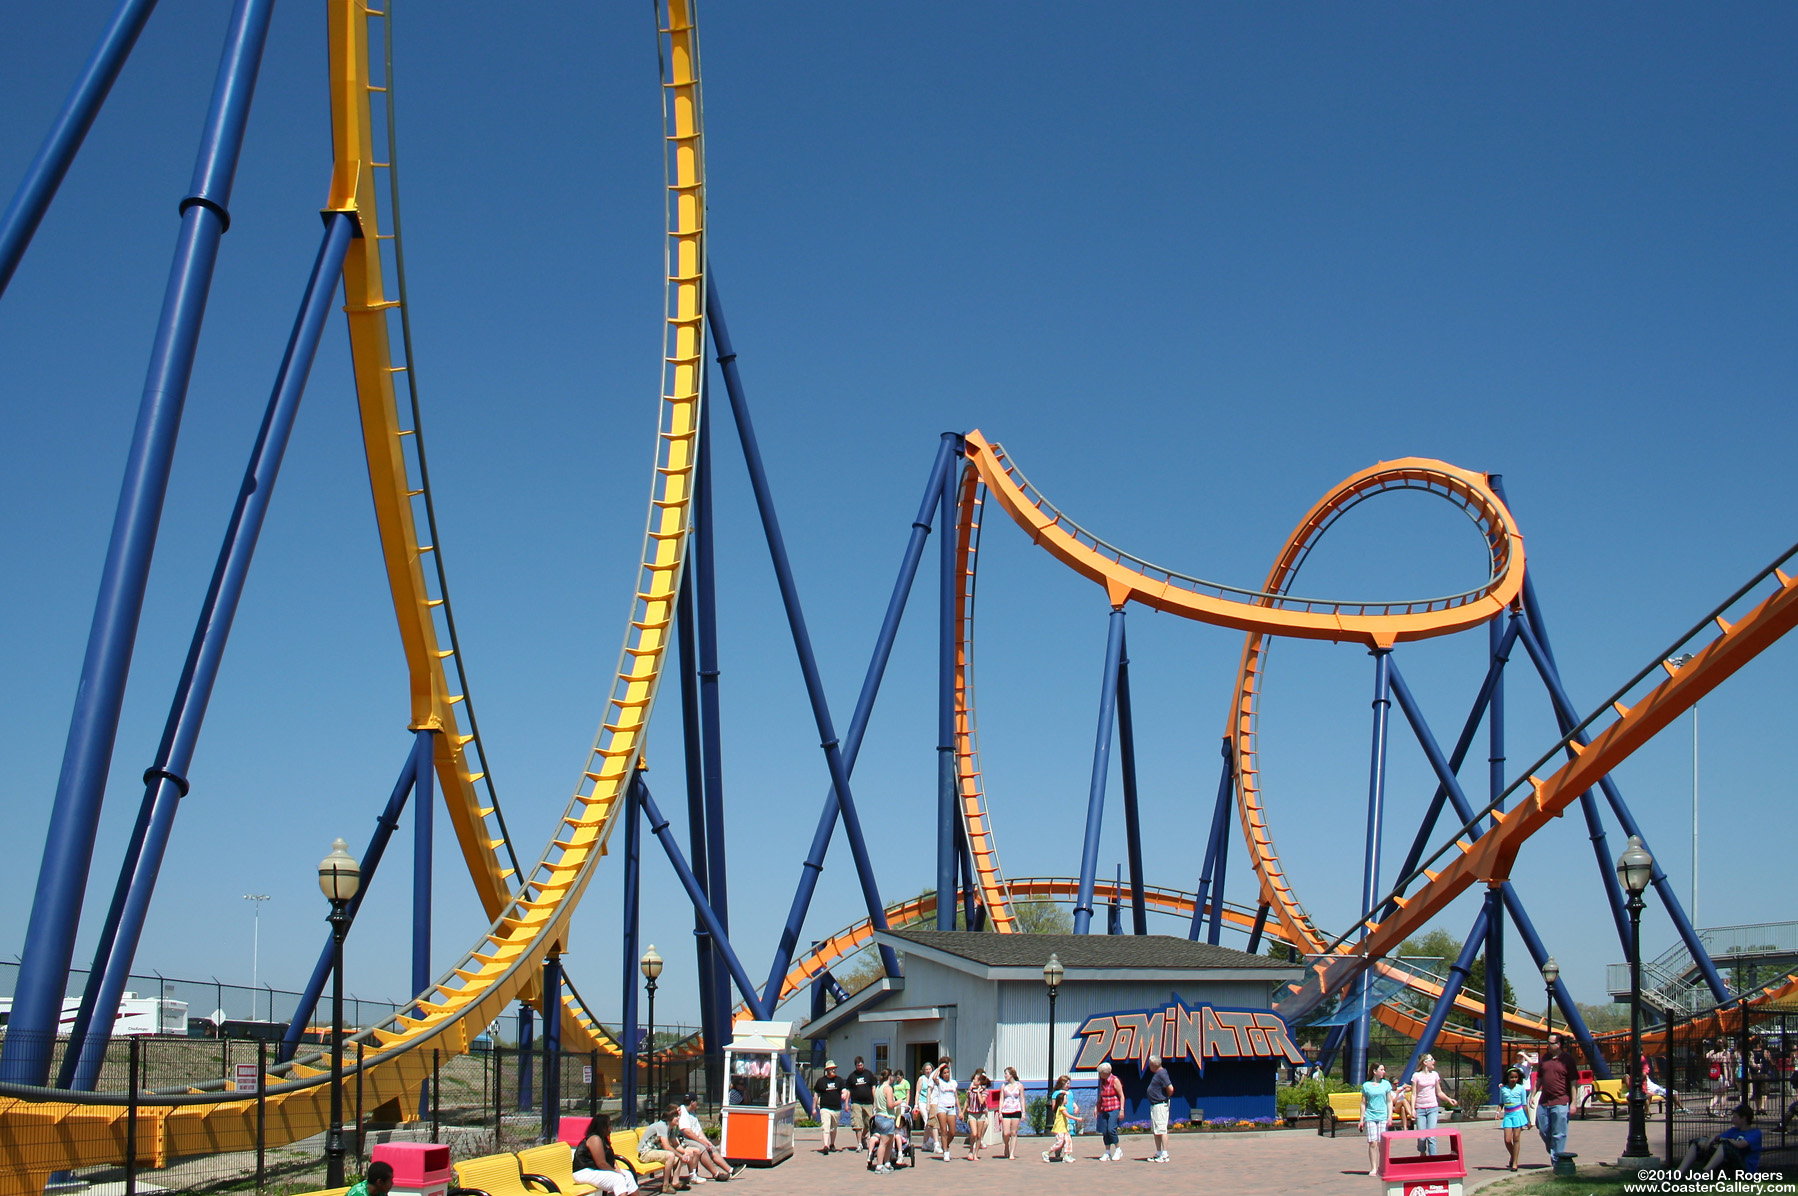 Dominator roller coaster at Kings Dominion